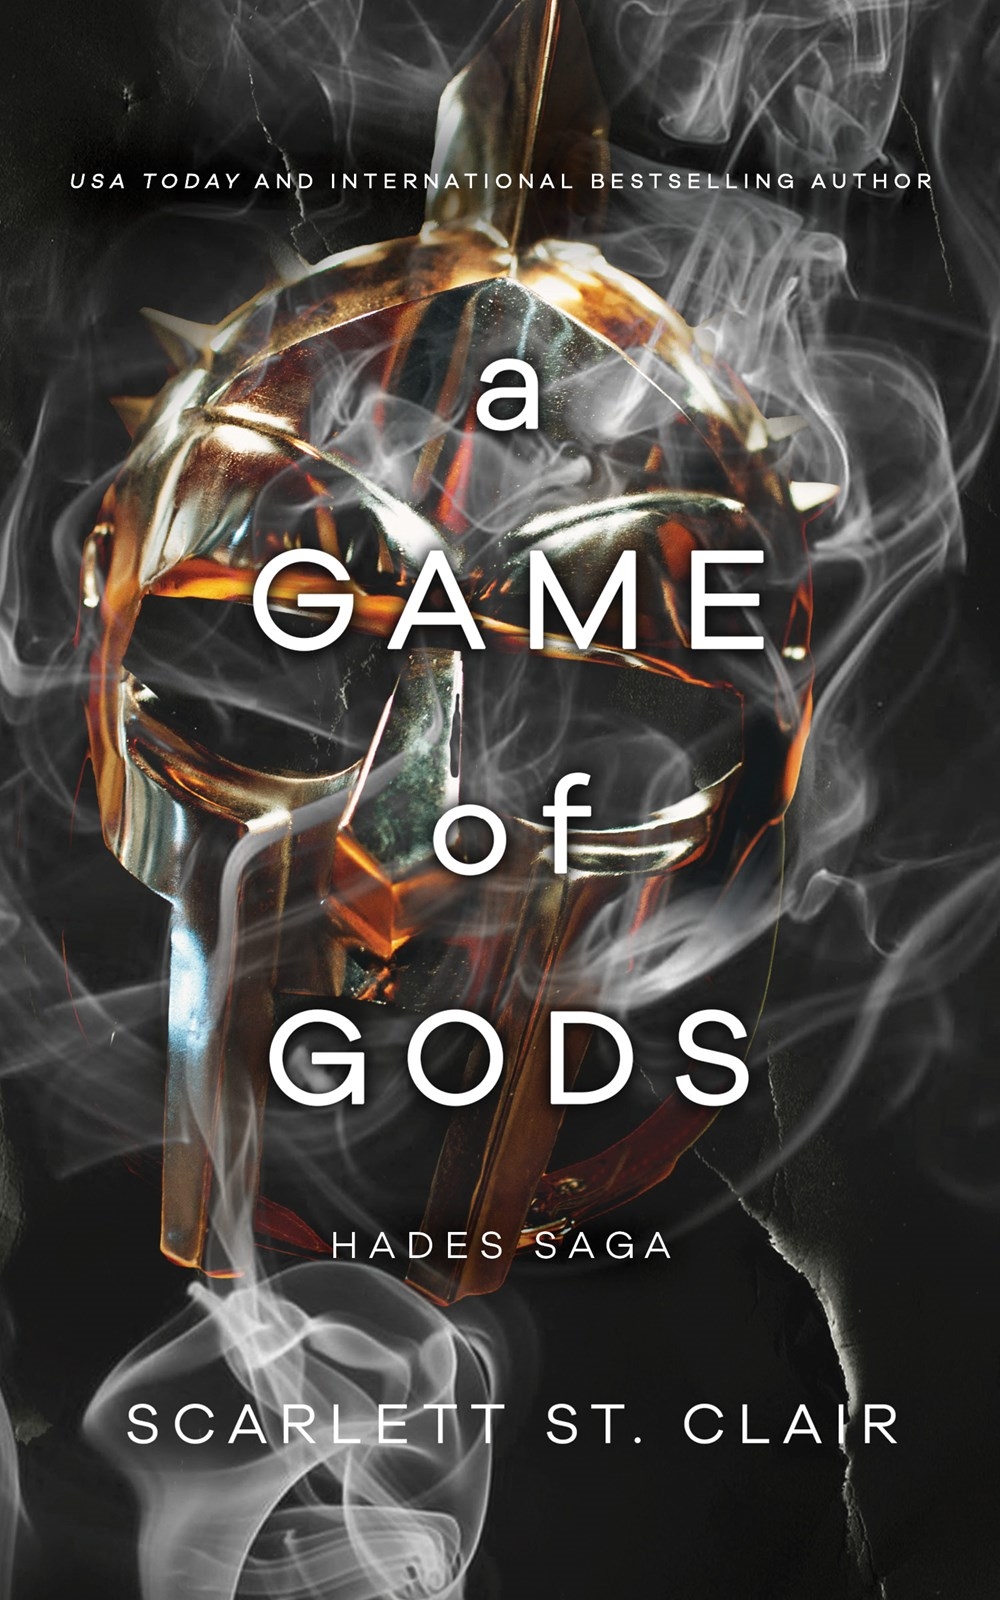 A Game of Gods by Scarlett St. Clair - Penguin Books New Zealand